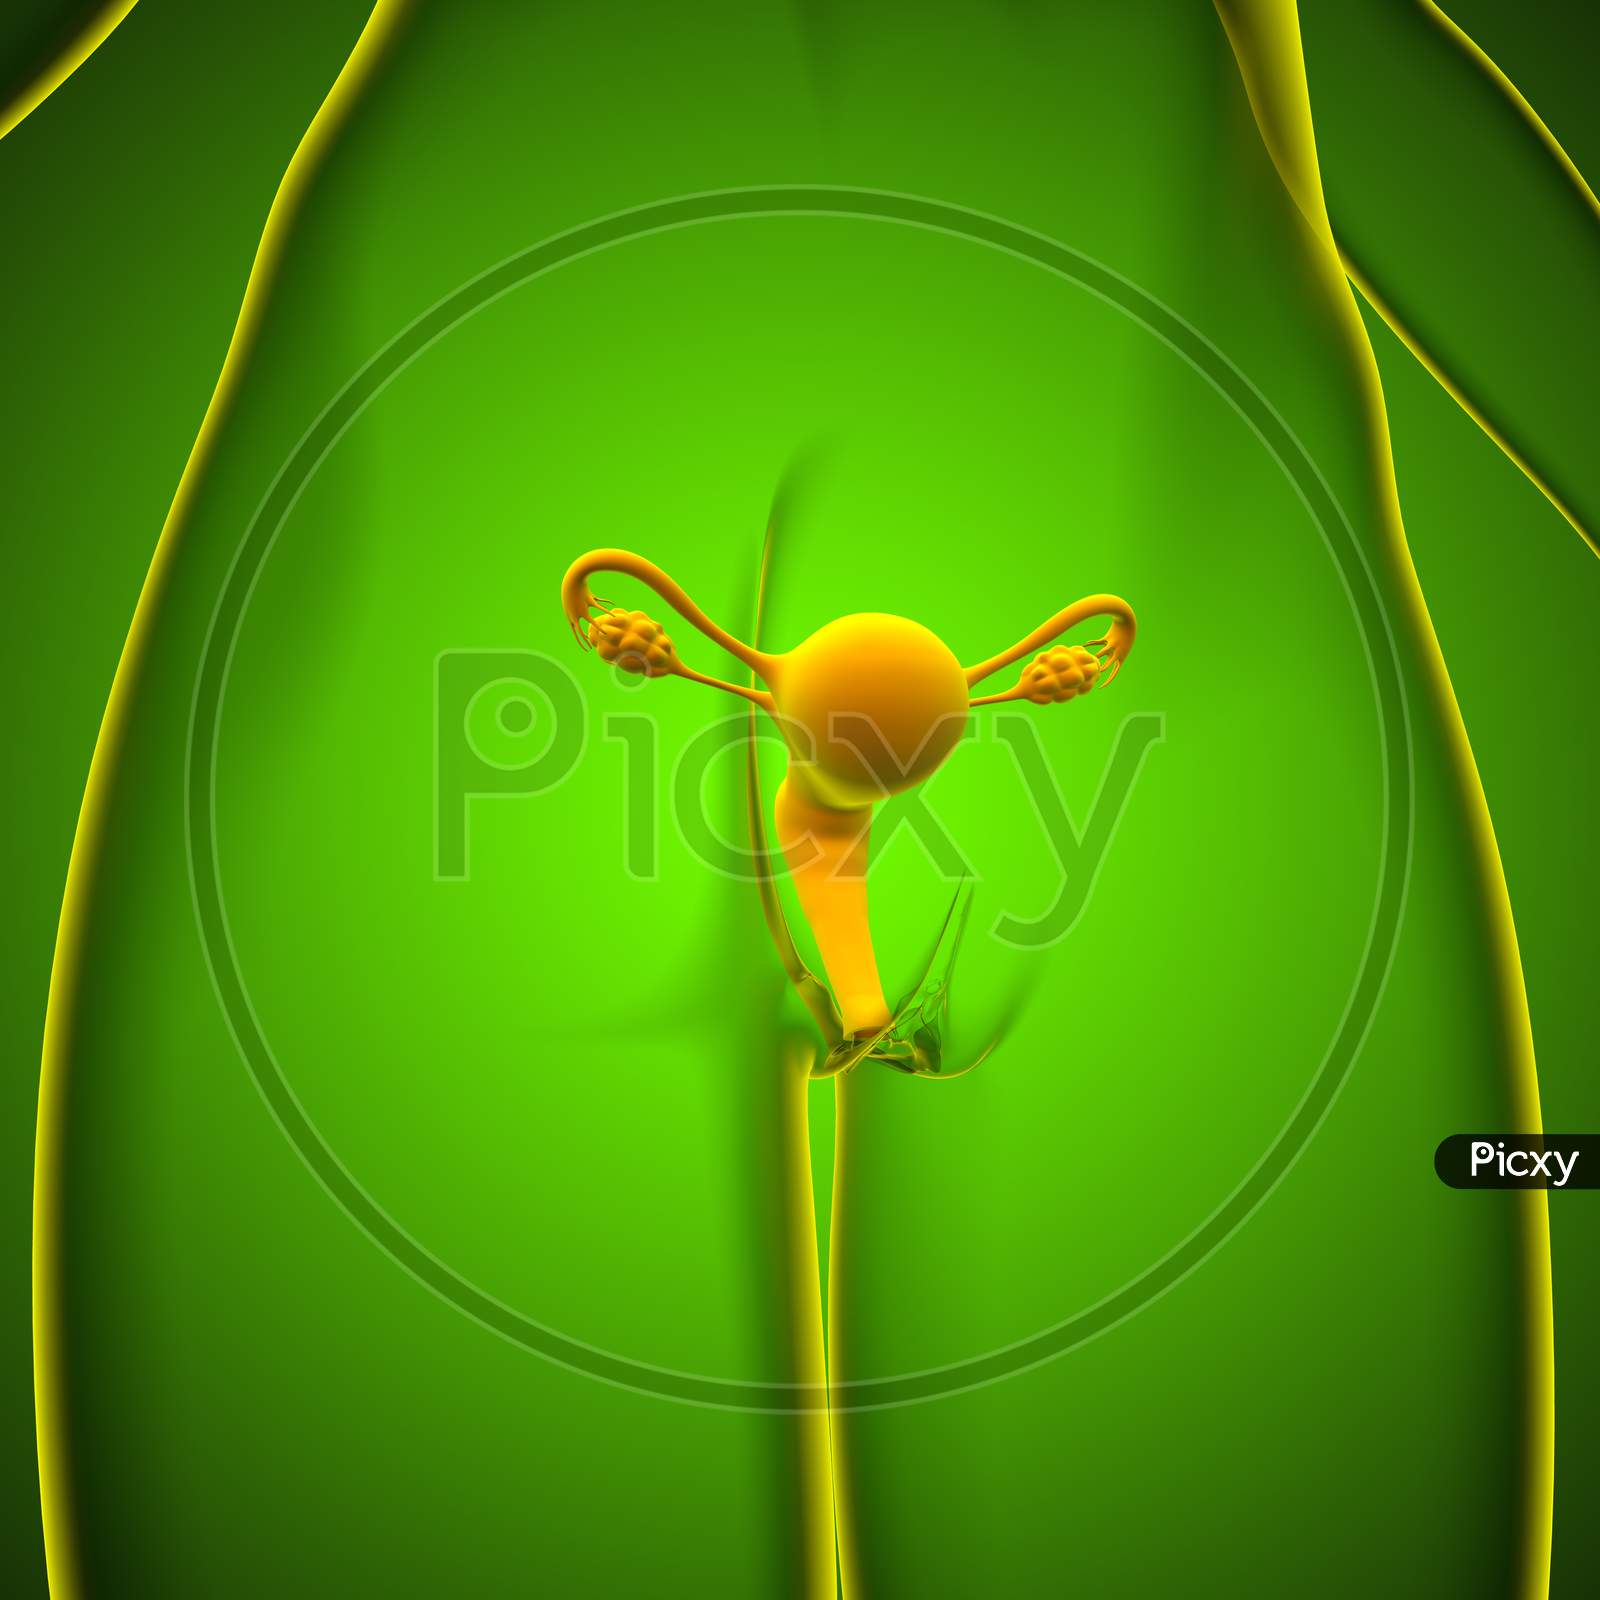 Image Of Female Reproductive System Anatomy For Medical Concept 3d Re109184 Picxy 1625